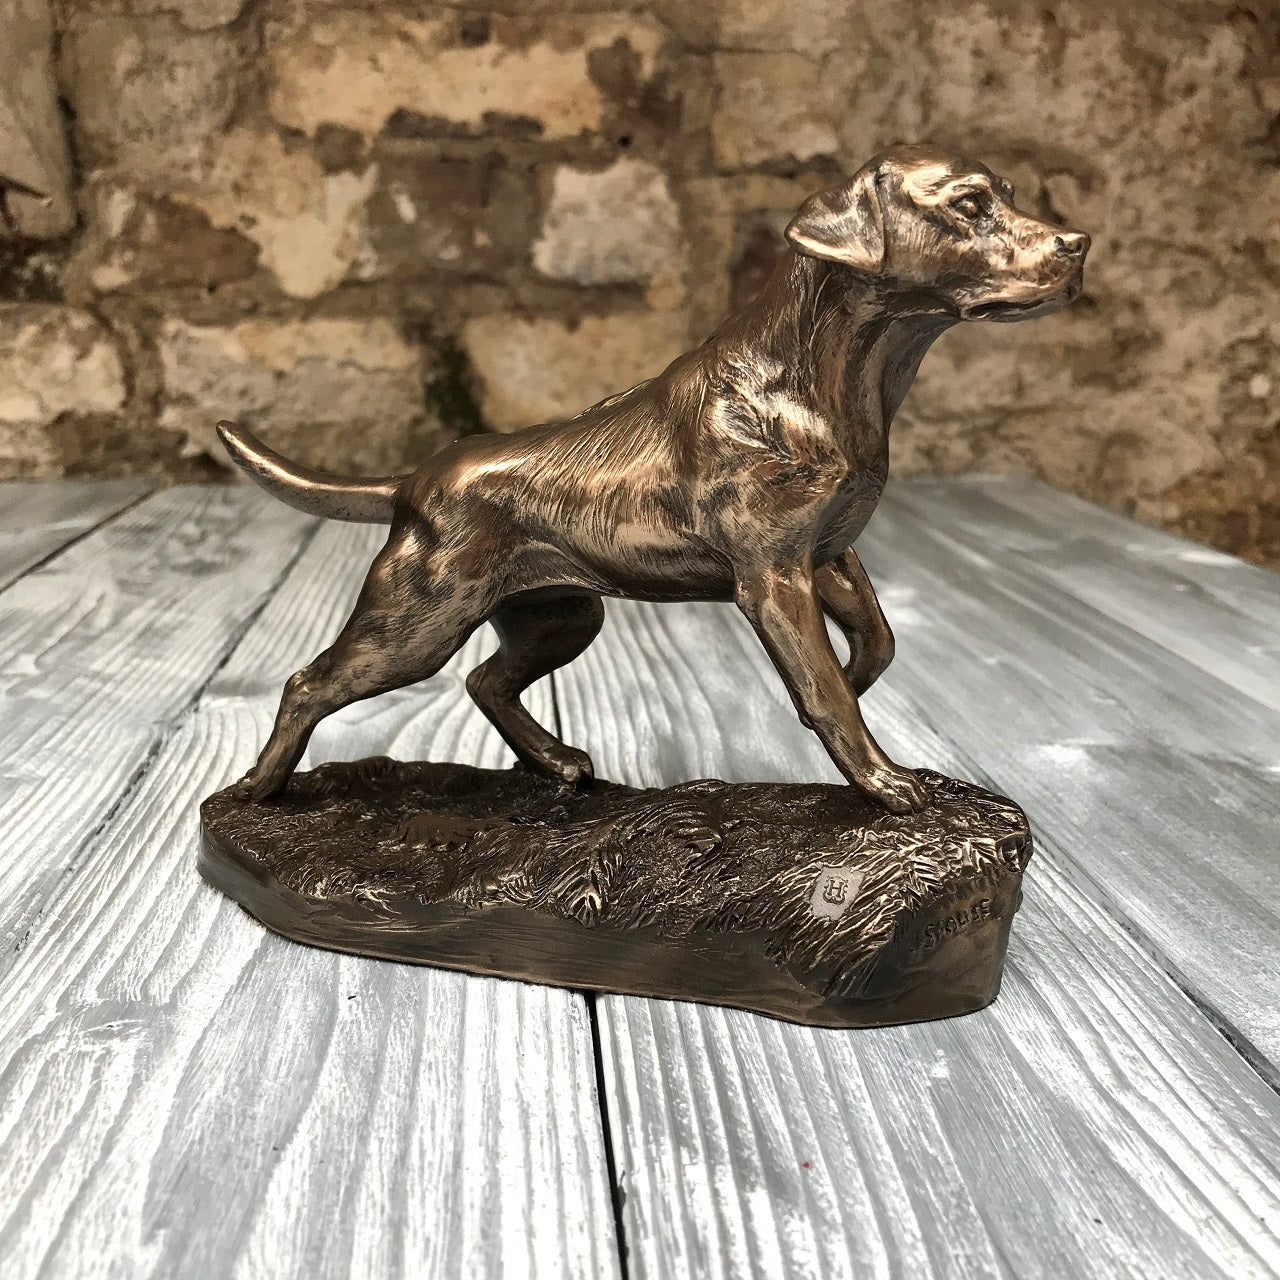 Genesis Labrador  A beautiful piece of bronze sculpture depicting a Labrador.  Genesis Fine Arts has evolved into a much loved and world famous Irish brand to produce a striking range of handcrafted cold cast bronze sculptures.